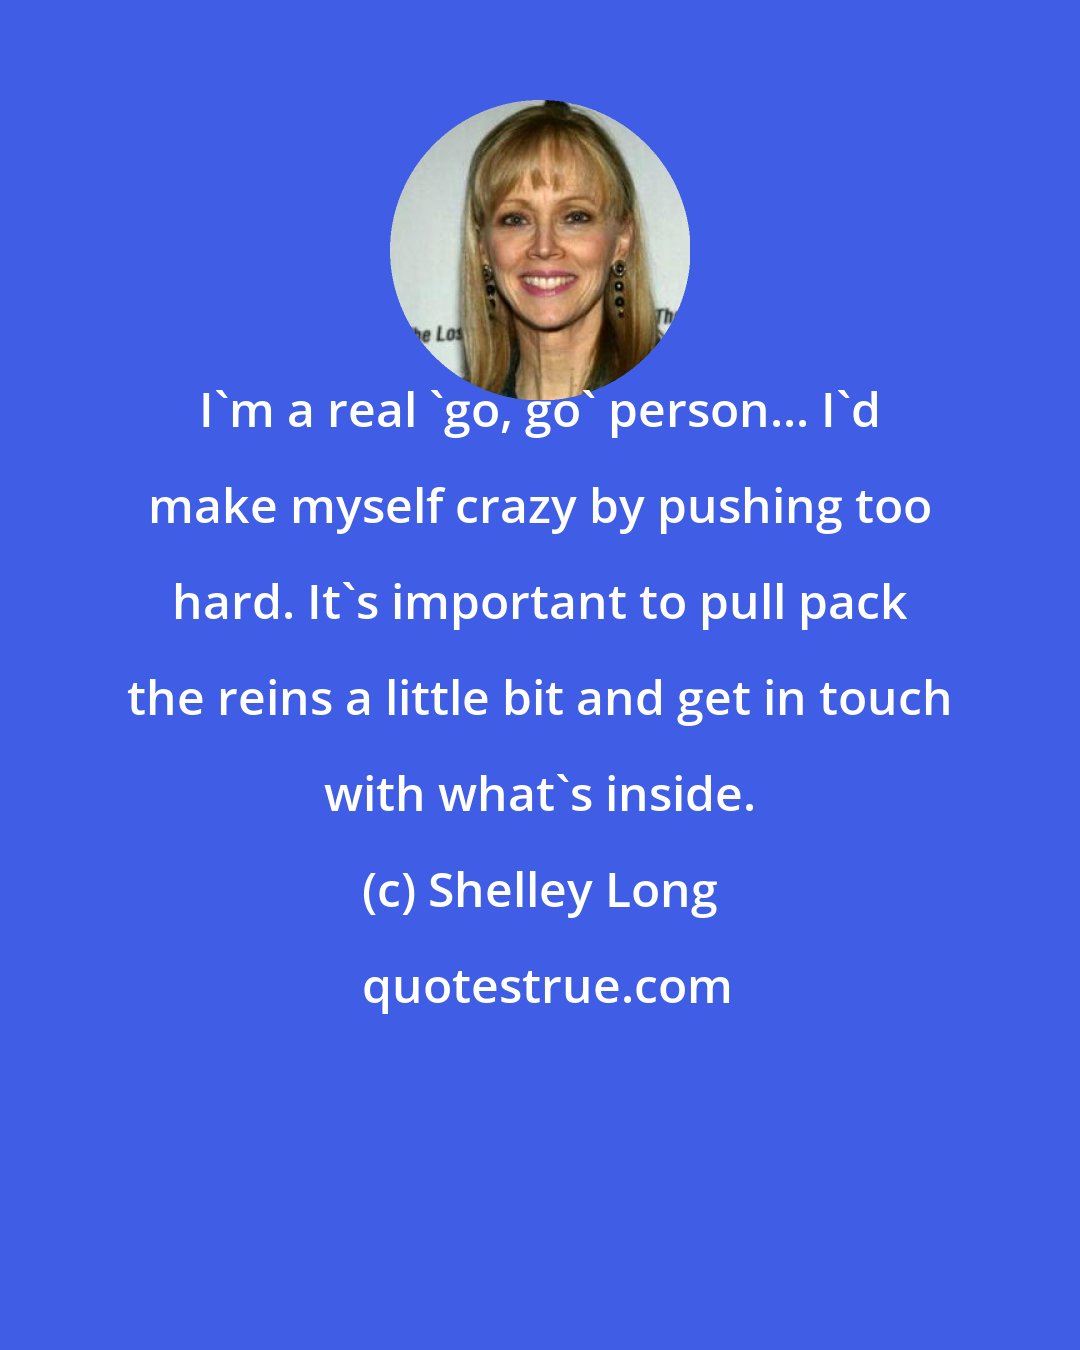 Shelley Long: I'm a real 'go, go' person... I'd make myself crazy by pushing too hard. It's important to pull pack the reins a little bit and get in touch with what's inside.